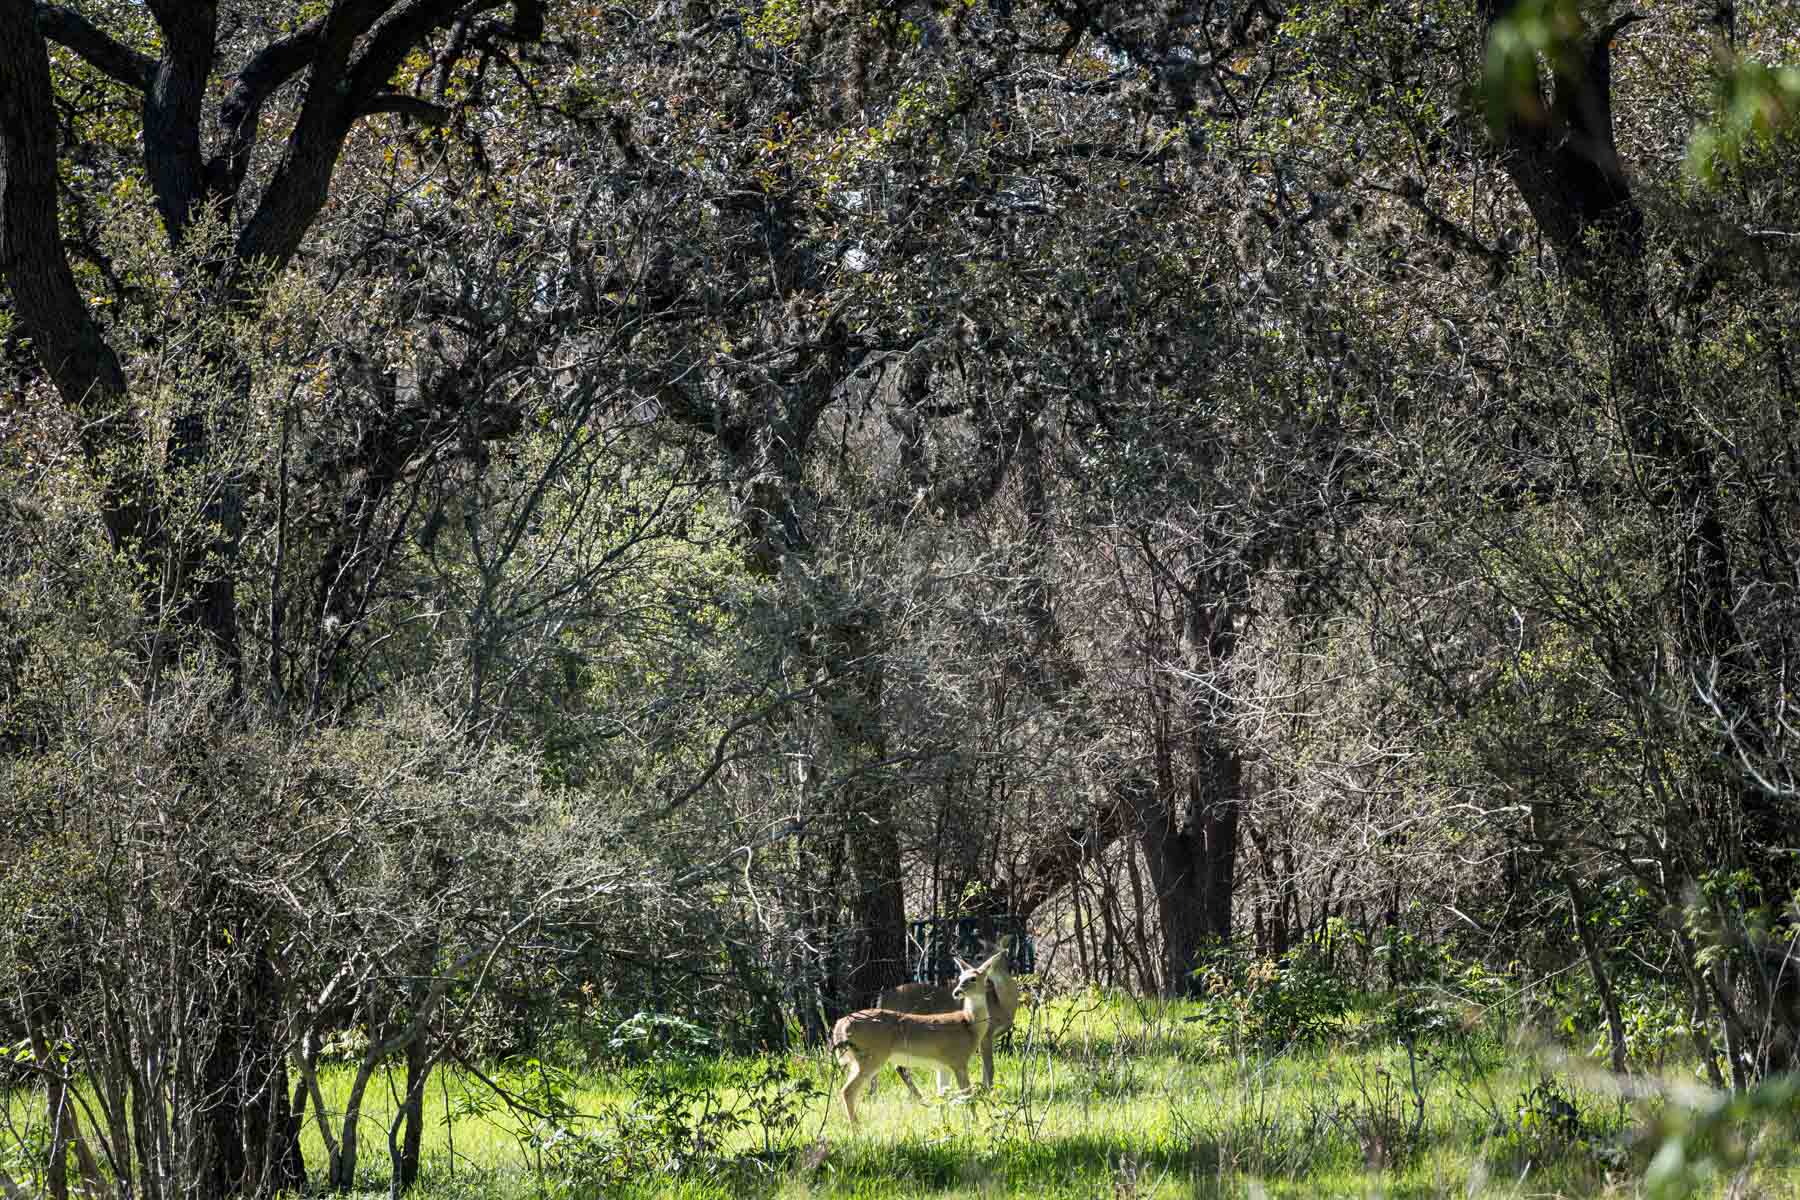 Deer in the woods in McAllister Park for an article on the best San Antonio parks for family portraits